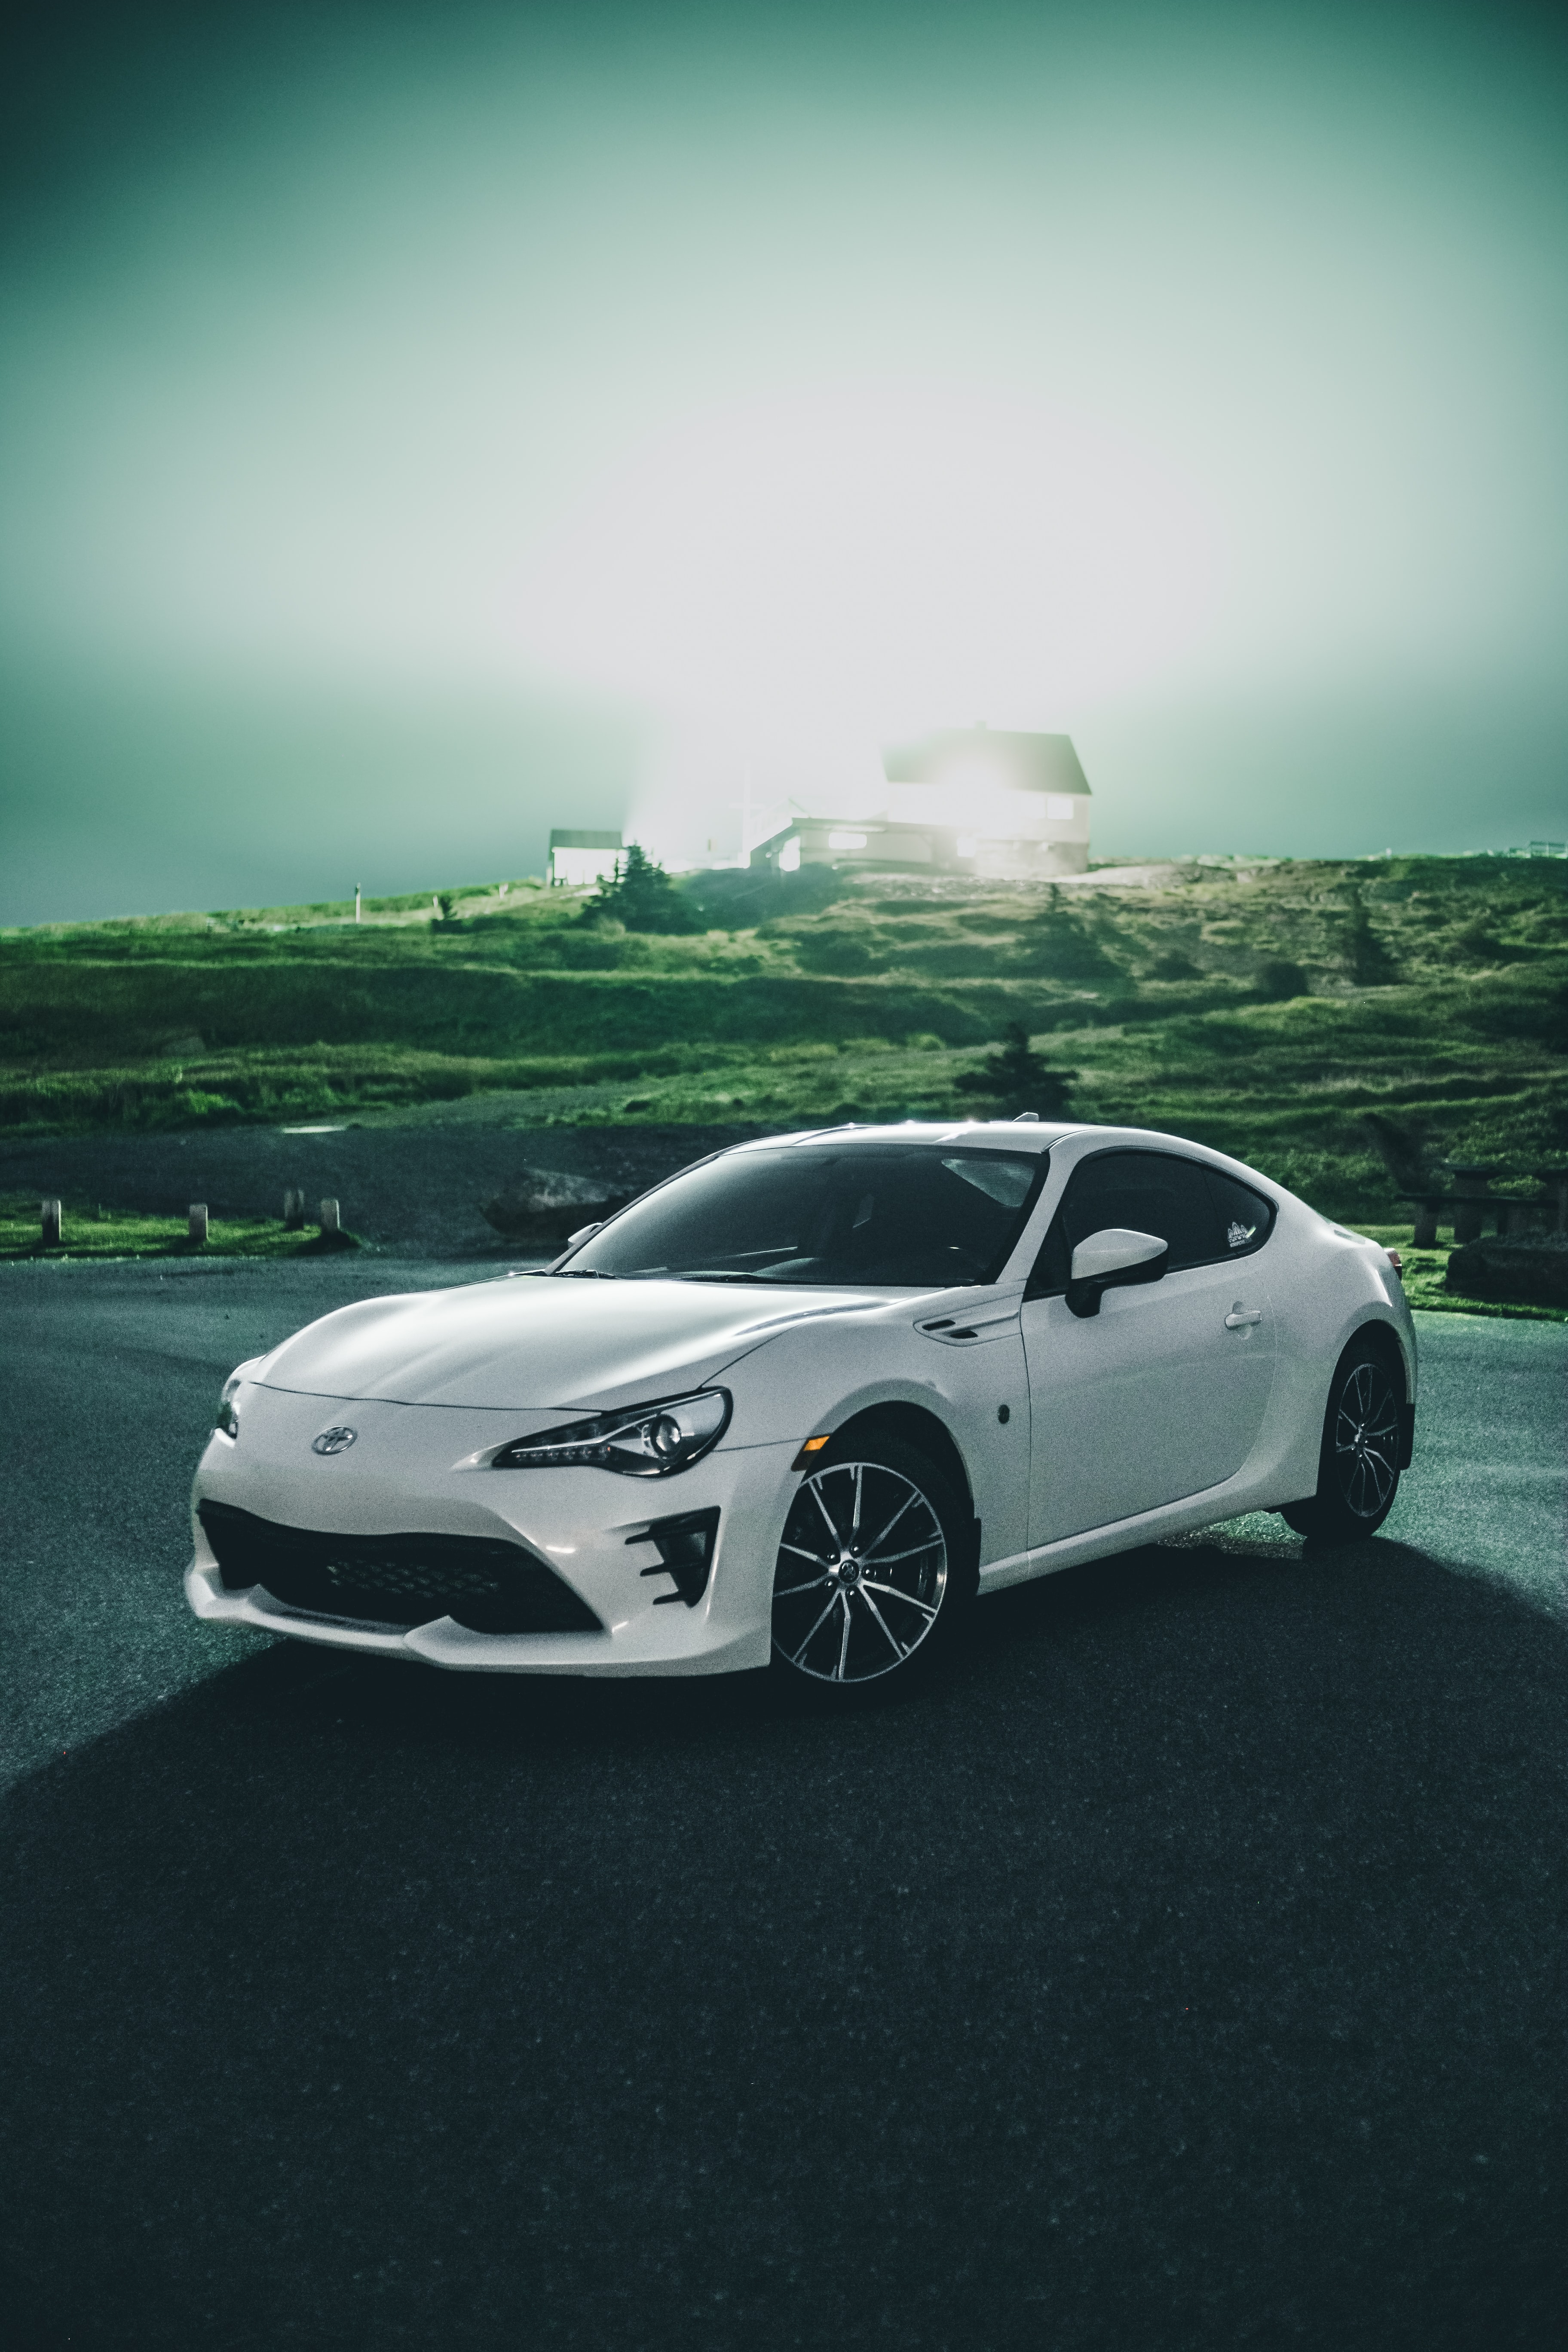 toyota, cars, sports car, sports, white, car, side view